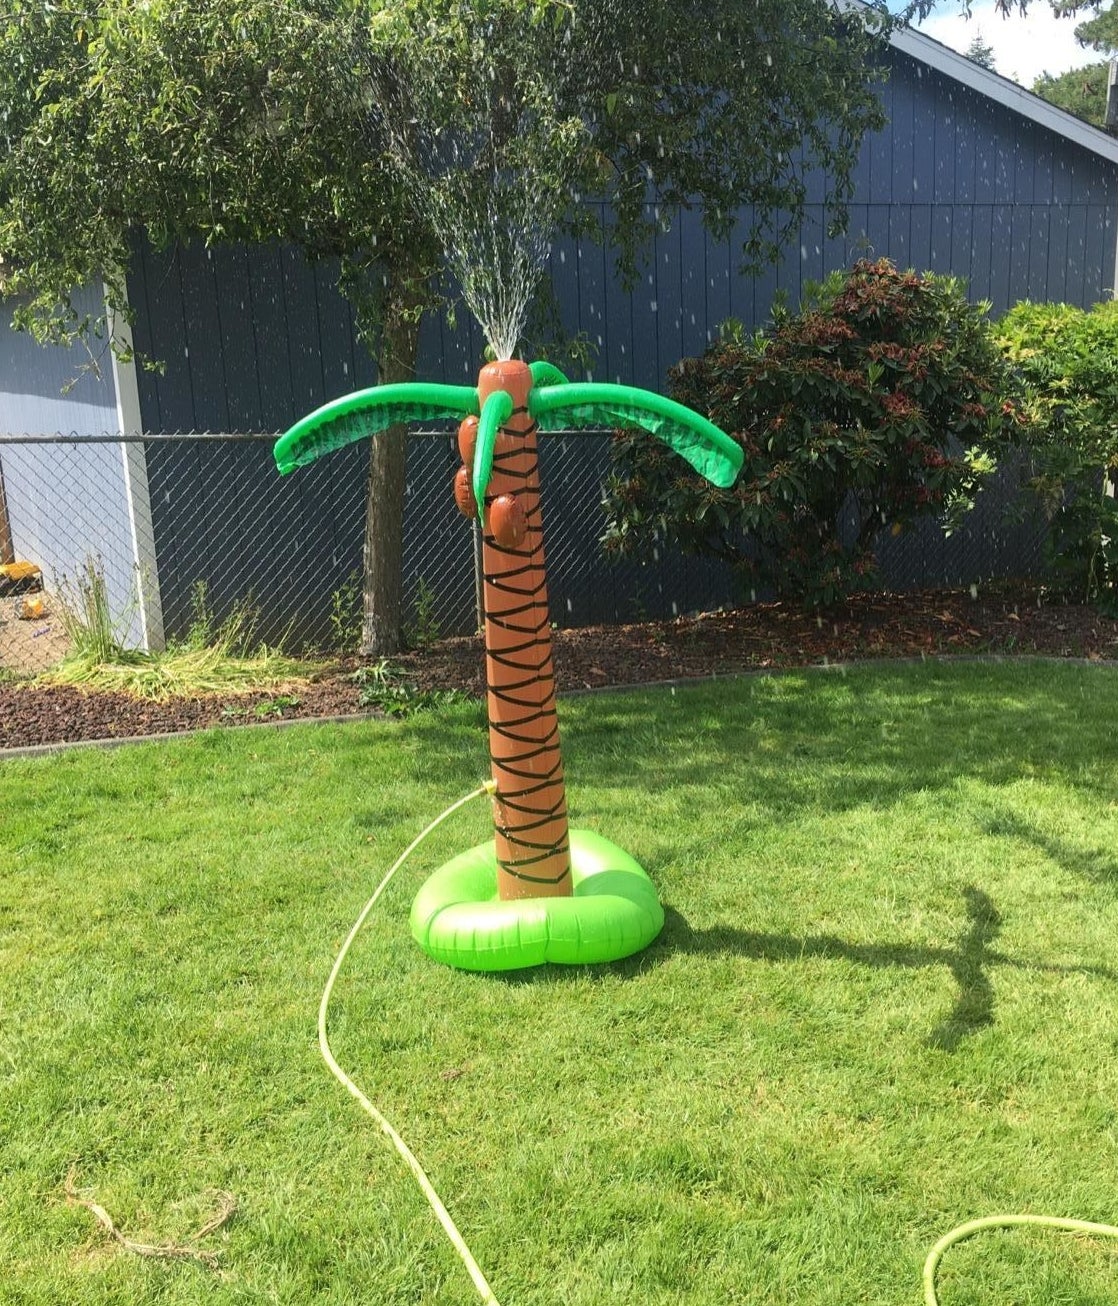 inflatable palm tree with hose attached spraying water out its top